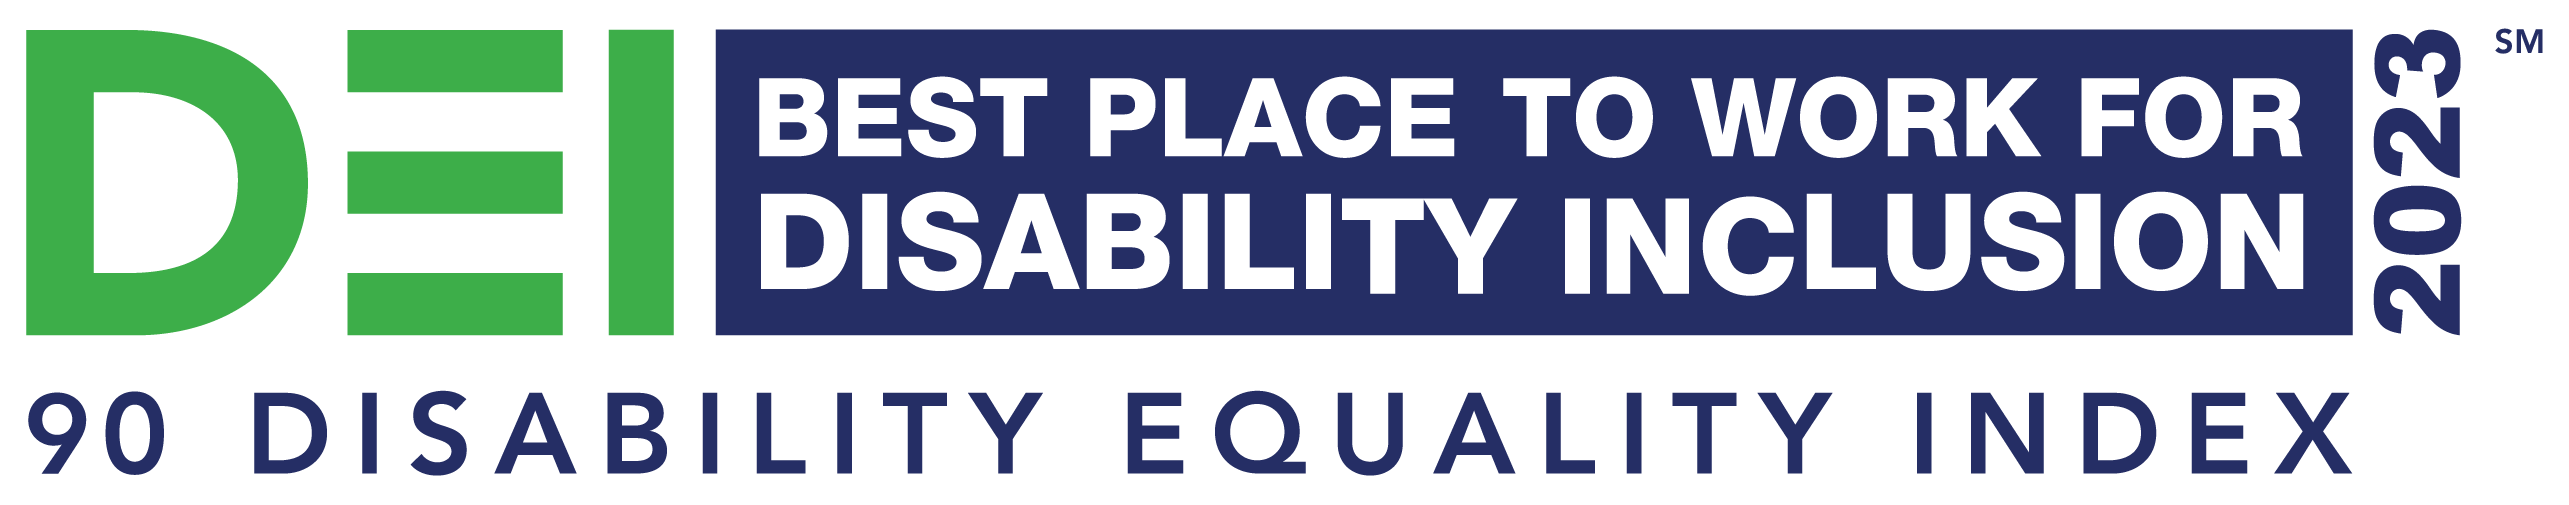 DEI Best Place to Work for Disability Inclusion. 90 Disability Equality Index in 2023.